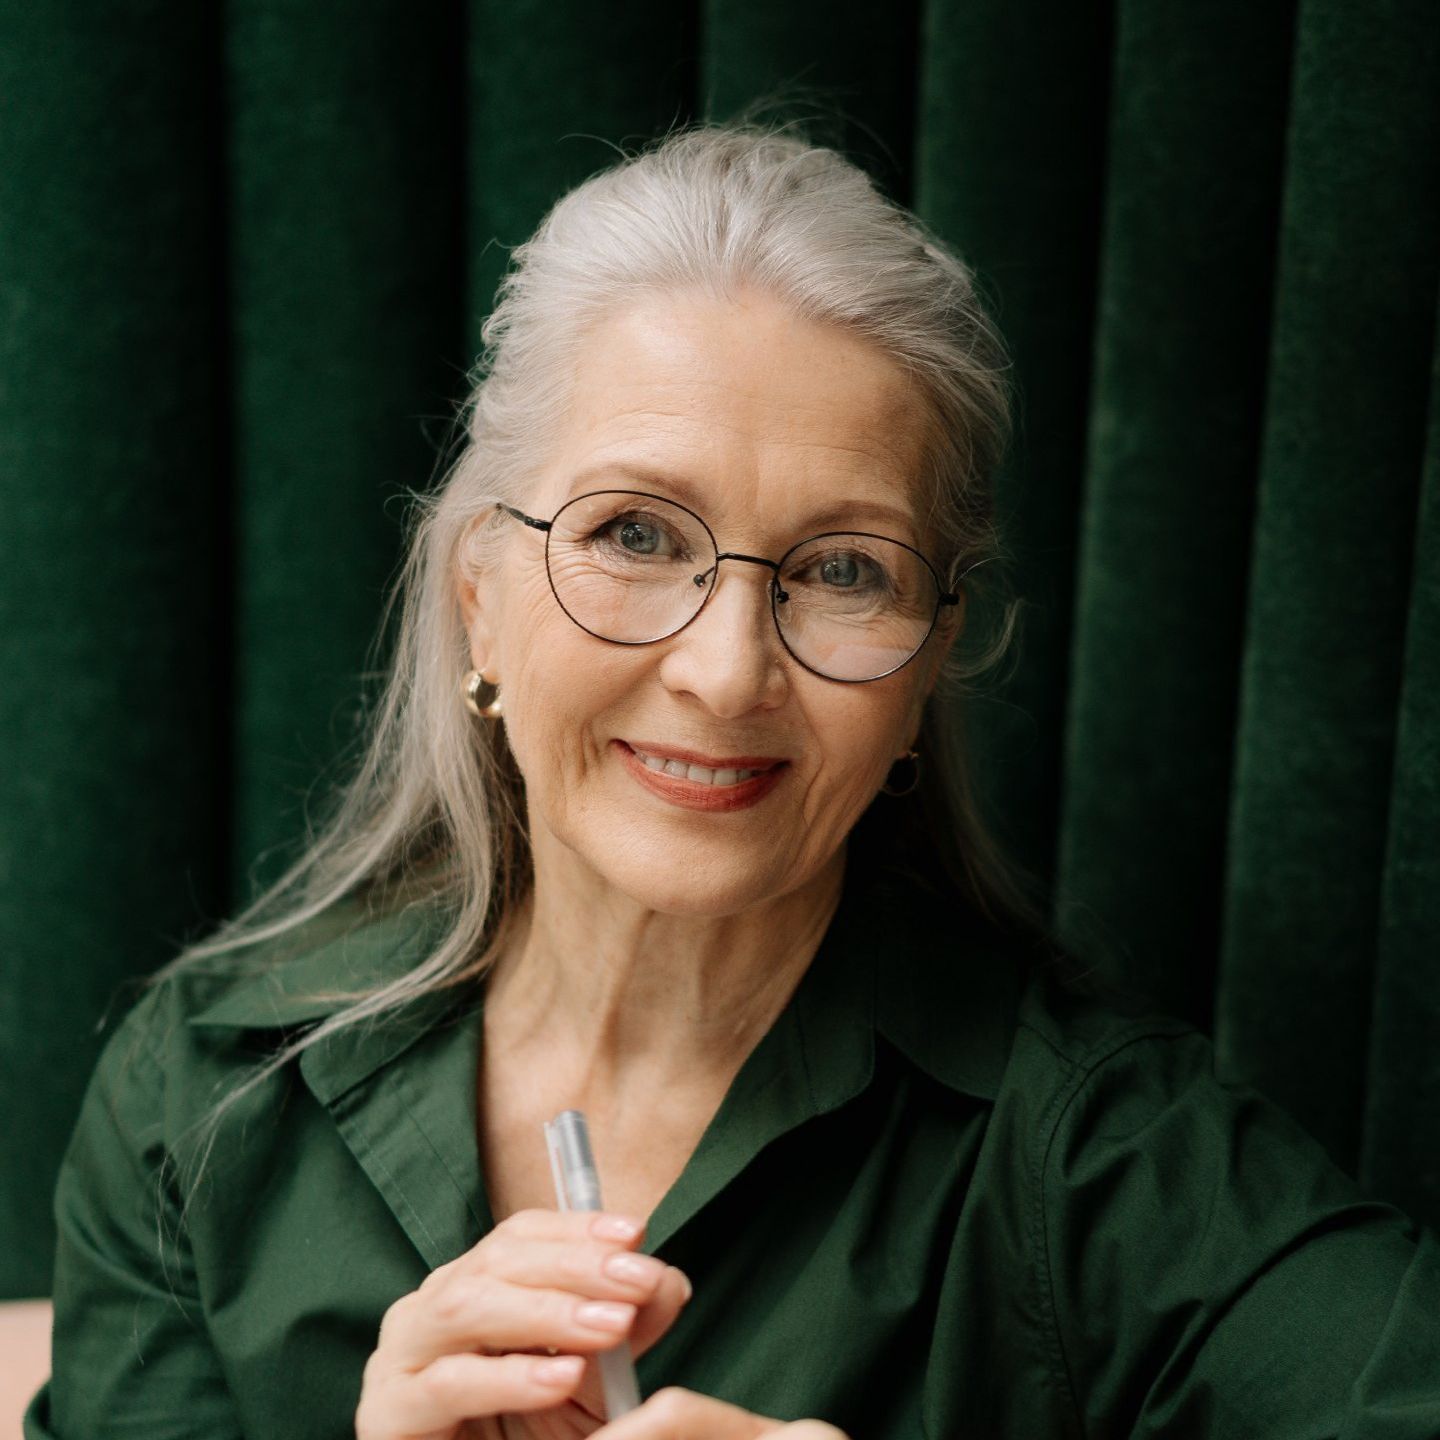 an older woman wearing glasses and a green shirt is holding a pen .